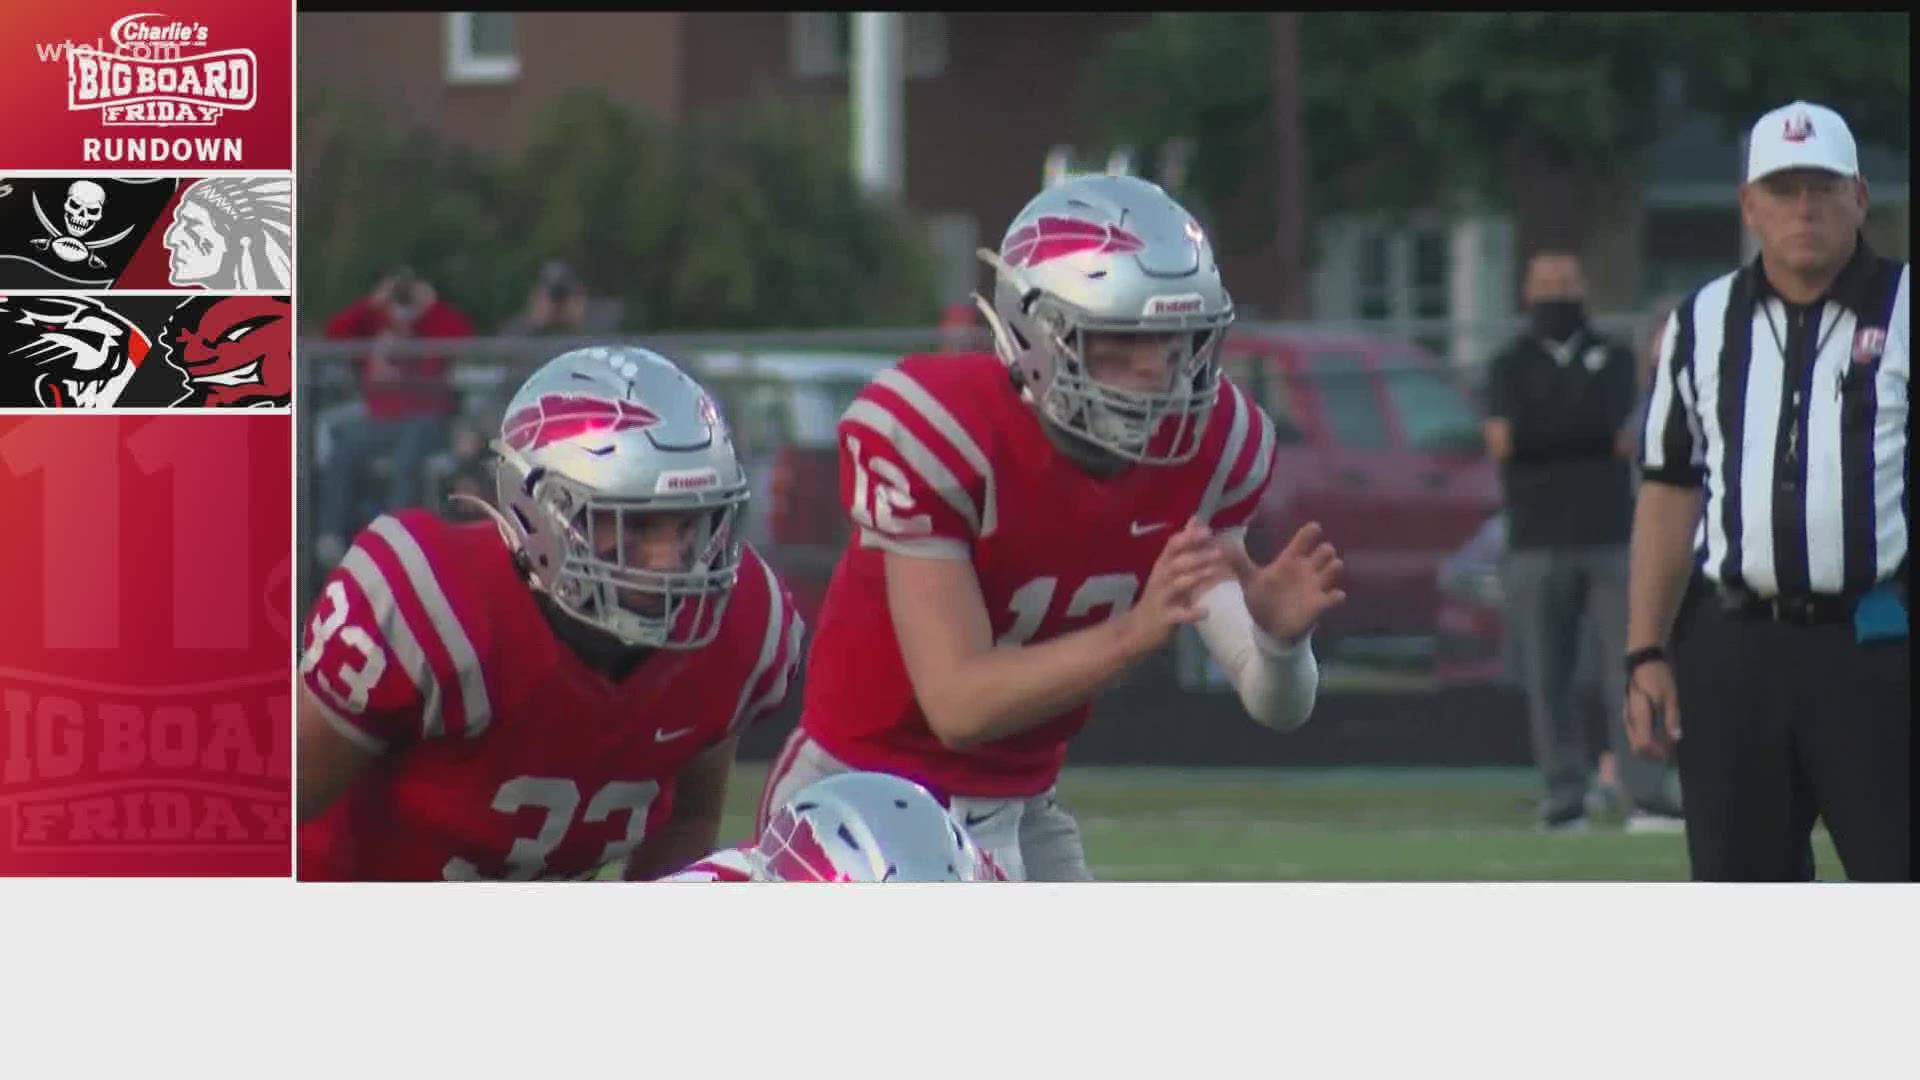 WTOL 11 Sports Director Jordan Strack brings you the highlights from week 3 of the 2020-21 high school football season sponsored by Charlie's Dodge Chrysler Jeep Ram